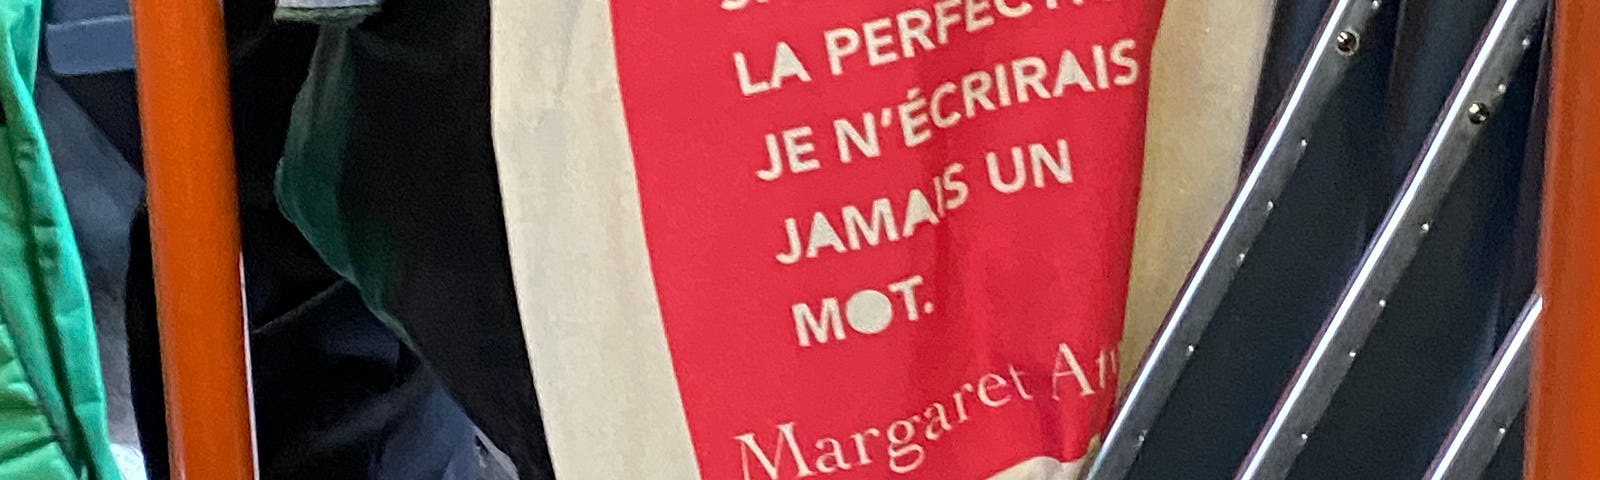 a totebag with a kind reminder, in Parisian tramway : “if I waited for perfection, I’d never write a word” Margaret Atwood.